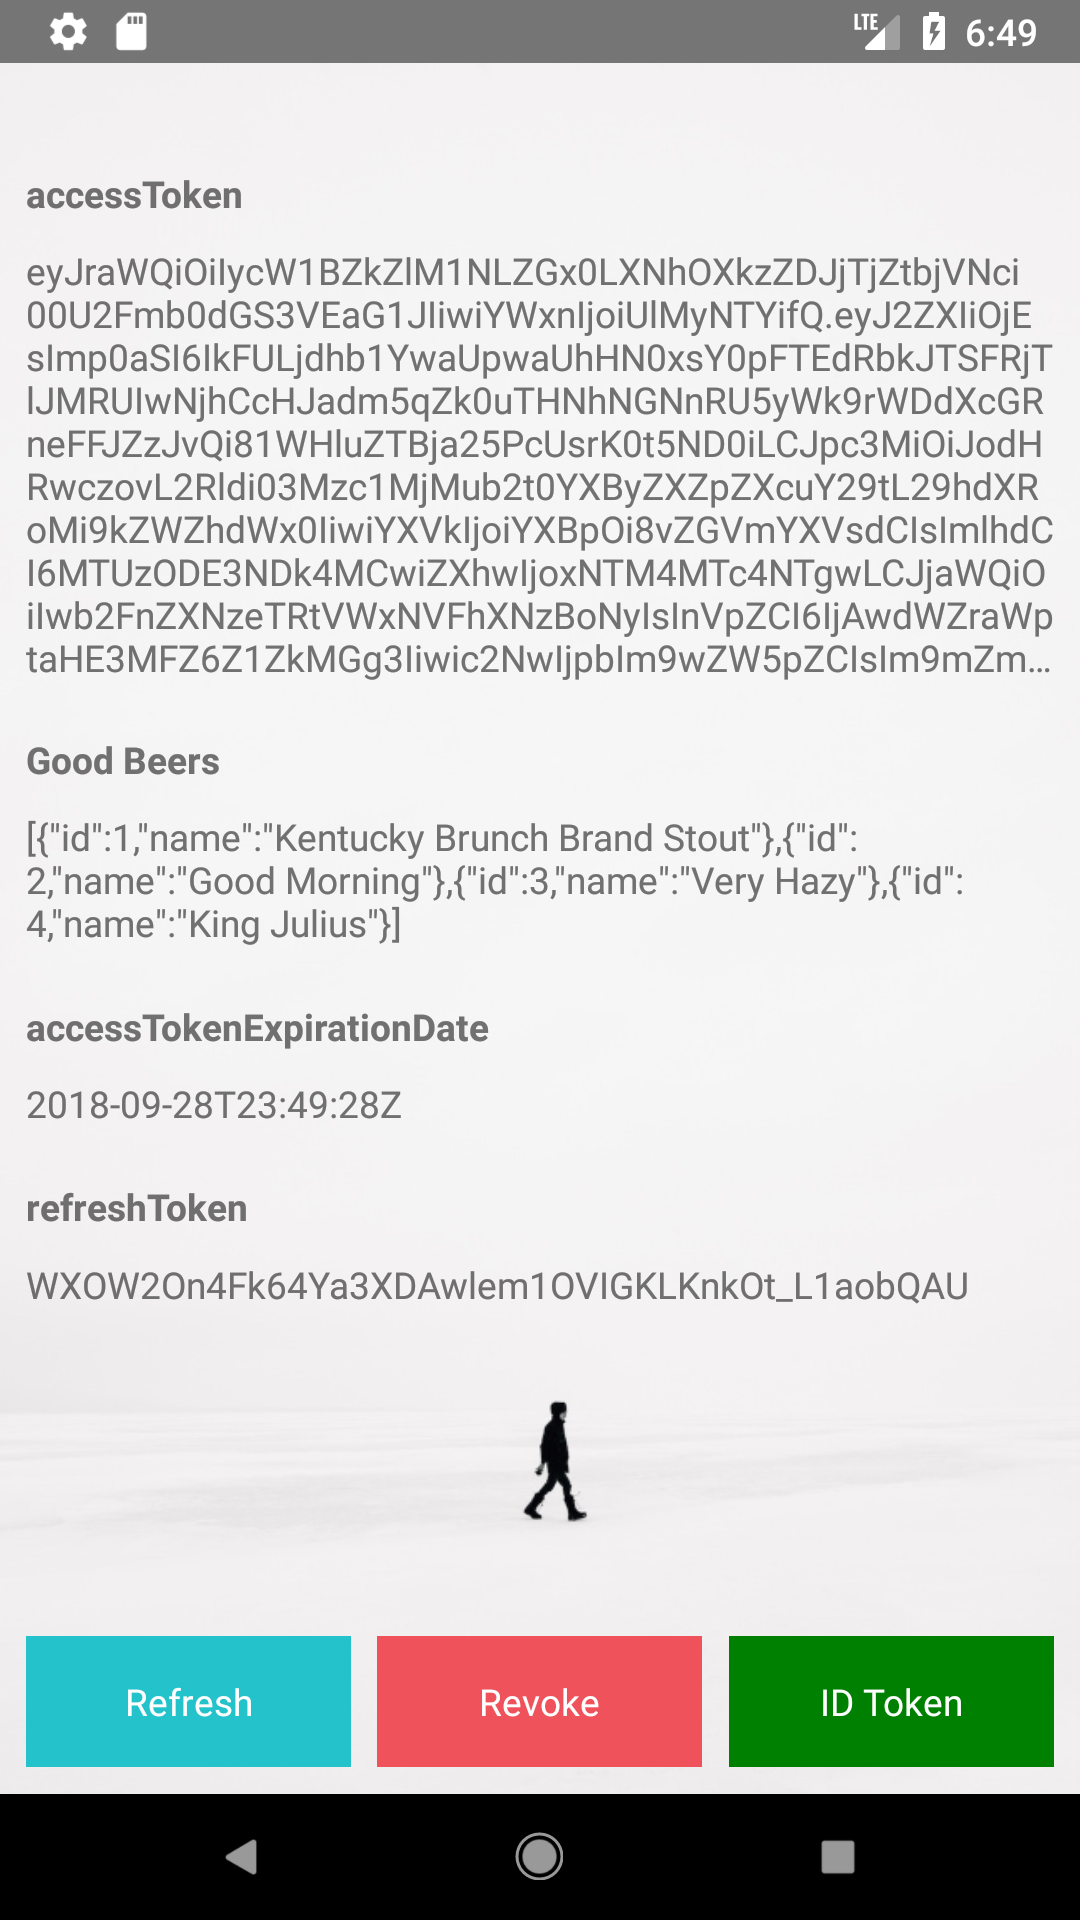 Good Beers on Android